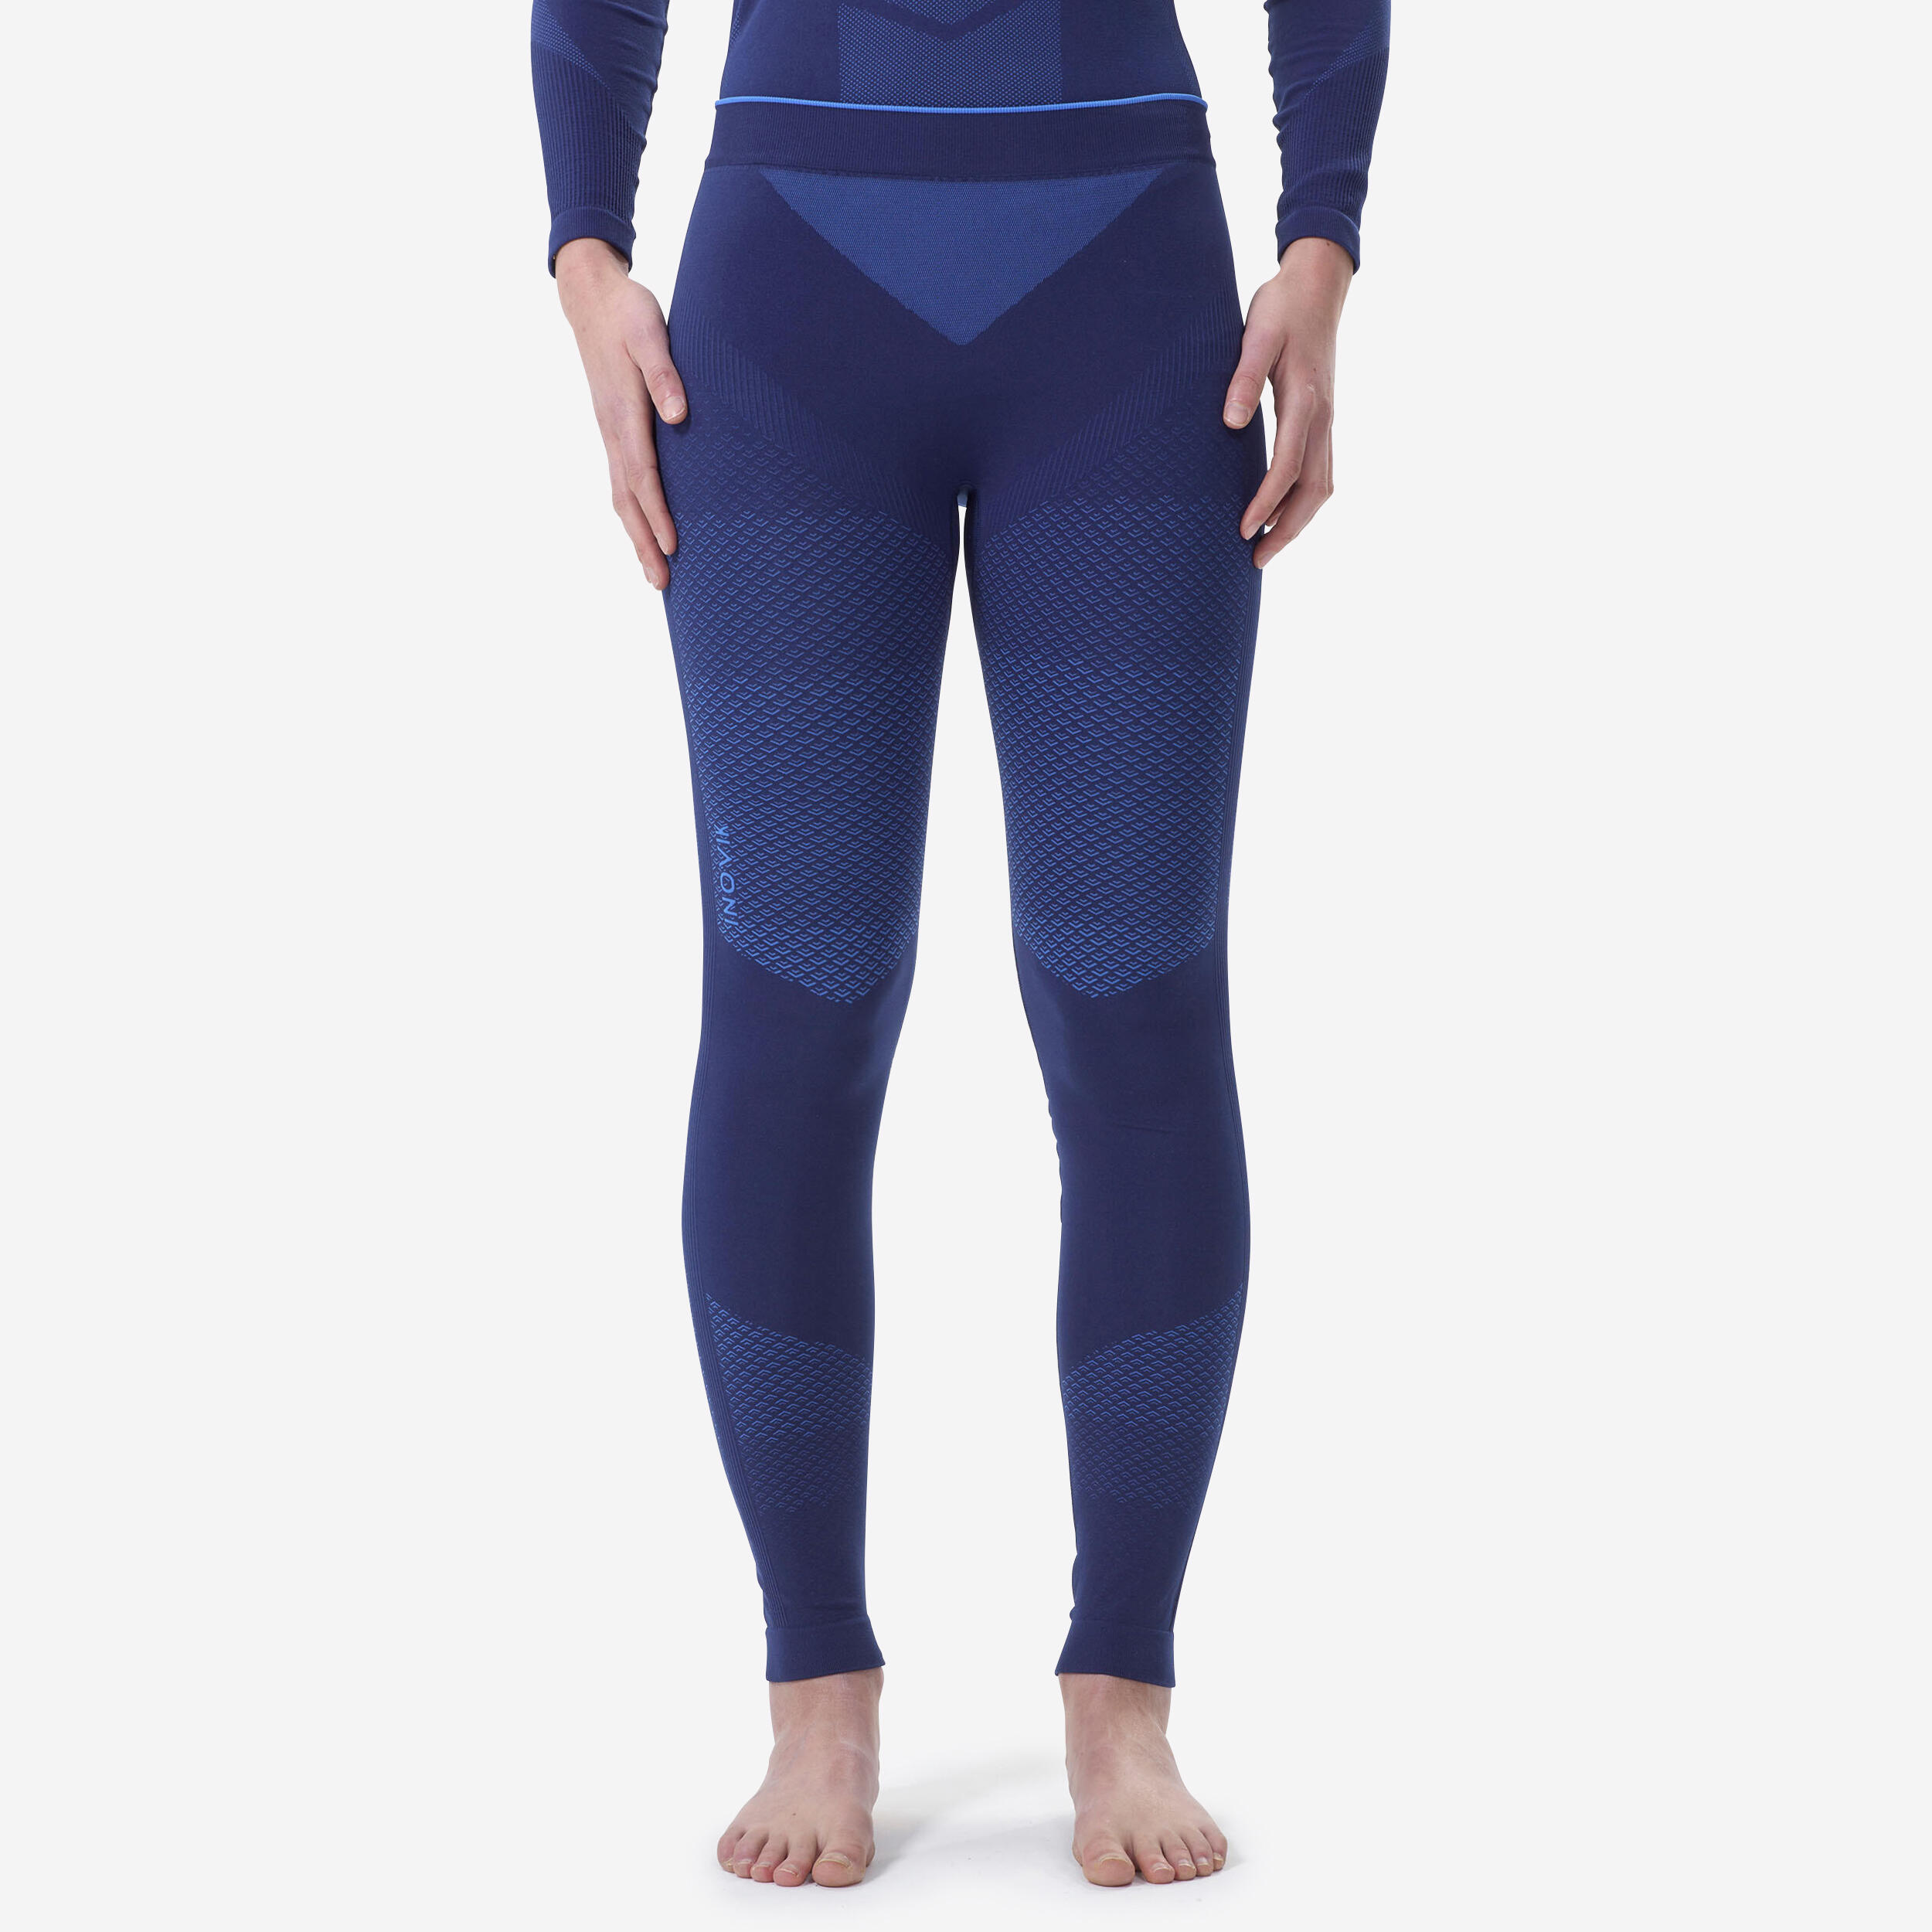 Women's Cross-Country Skiing Base Layer Bottoms - 900 Blue